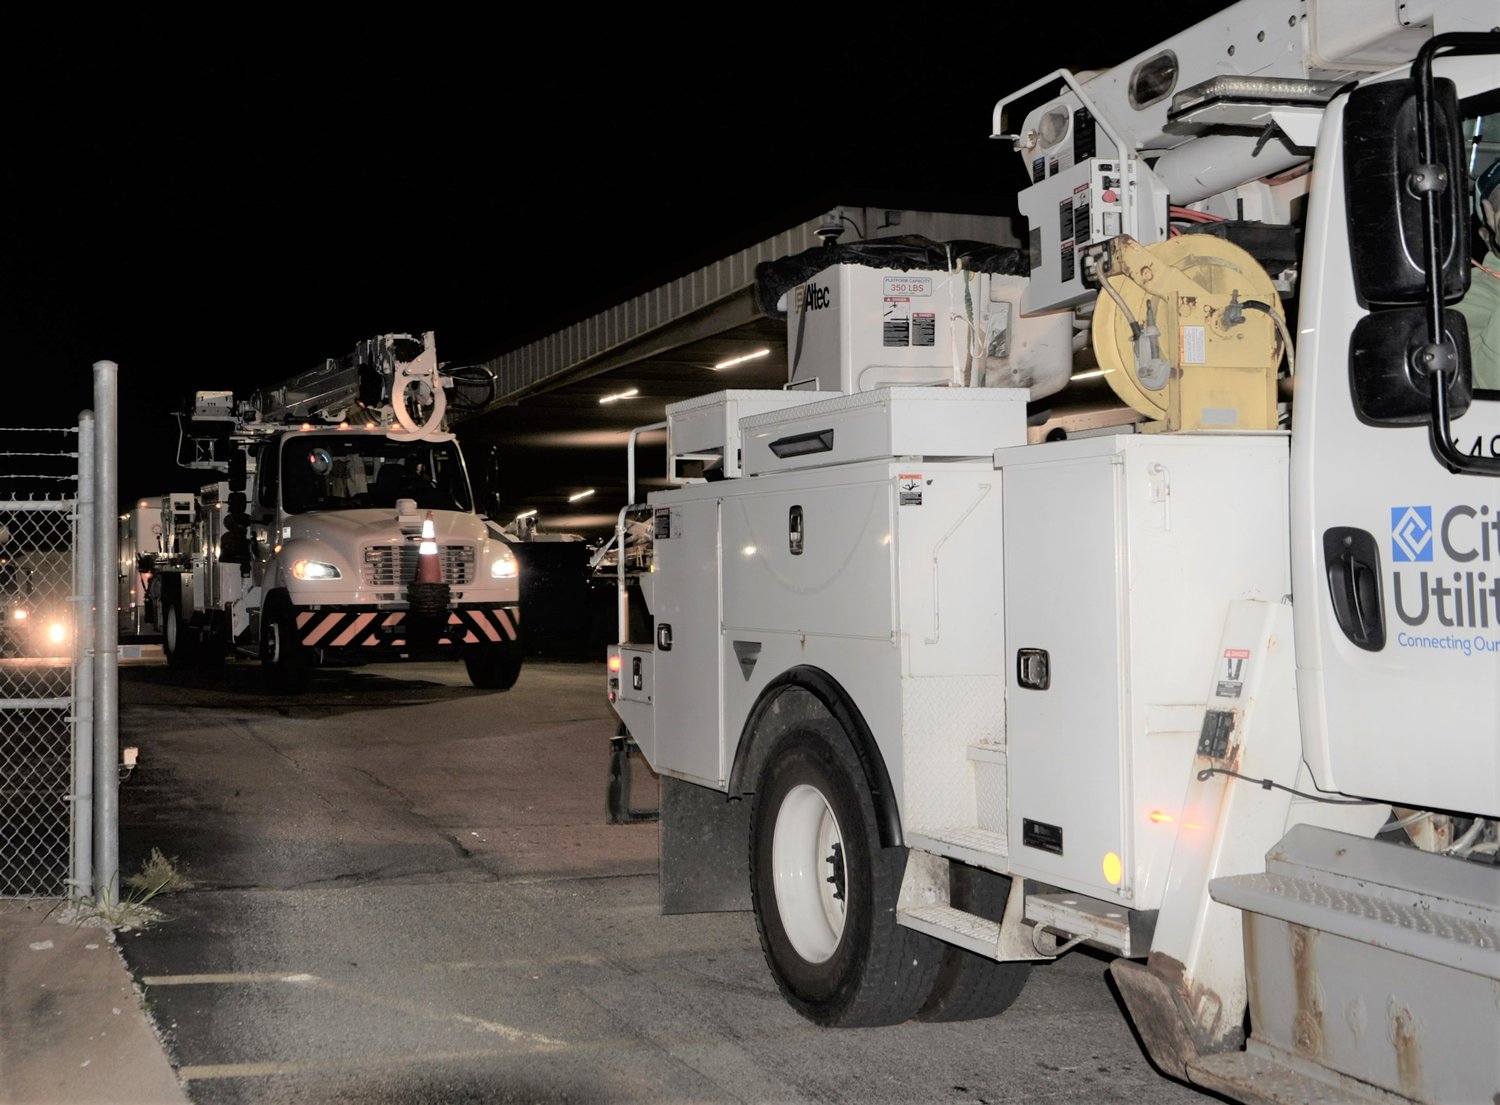 City Utilities sends electric line crews and support staff to Florida.